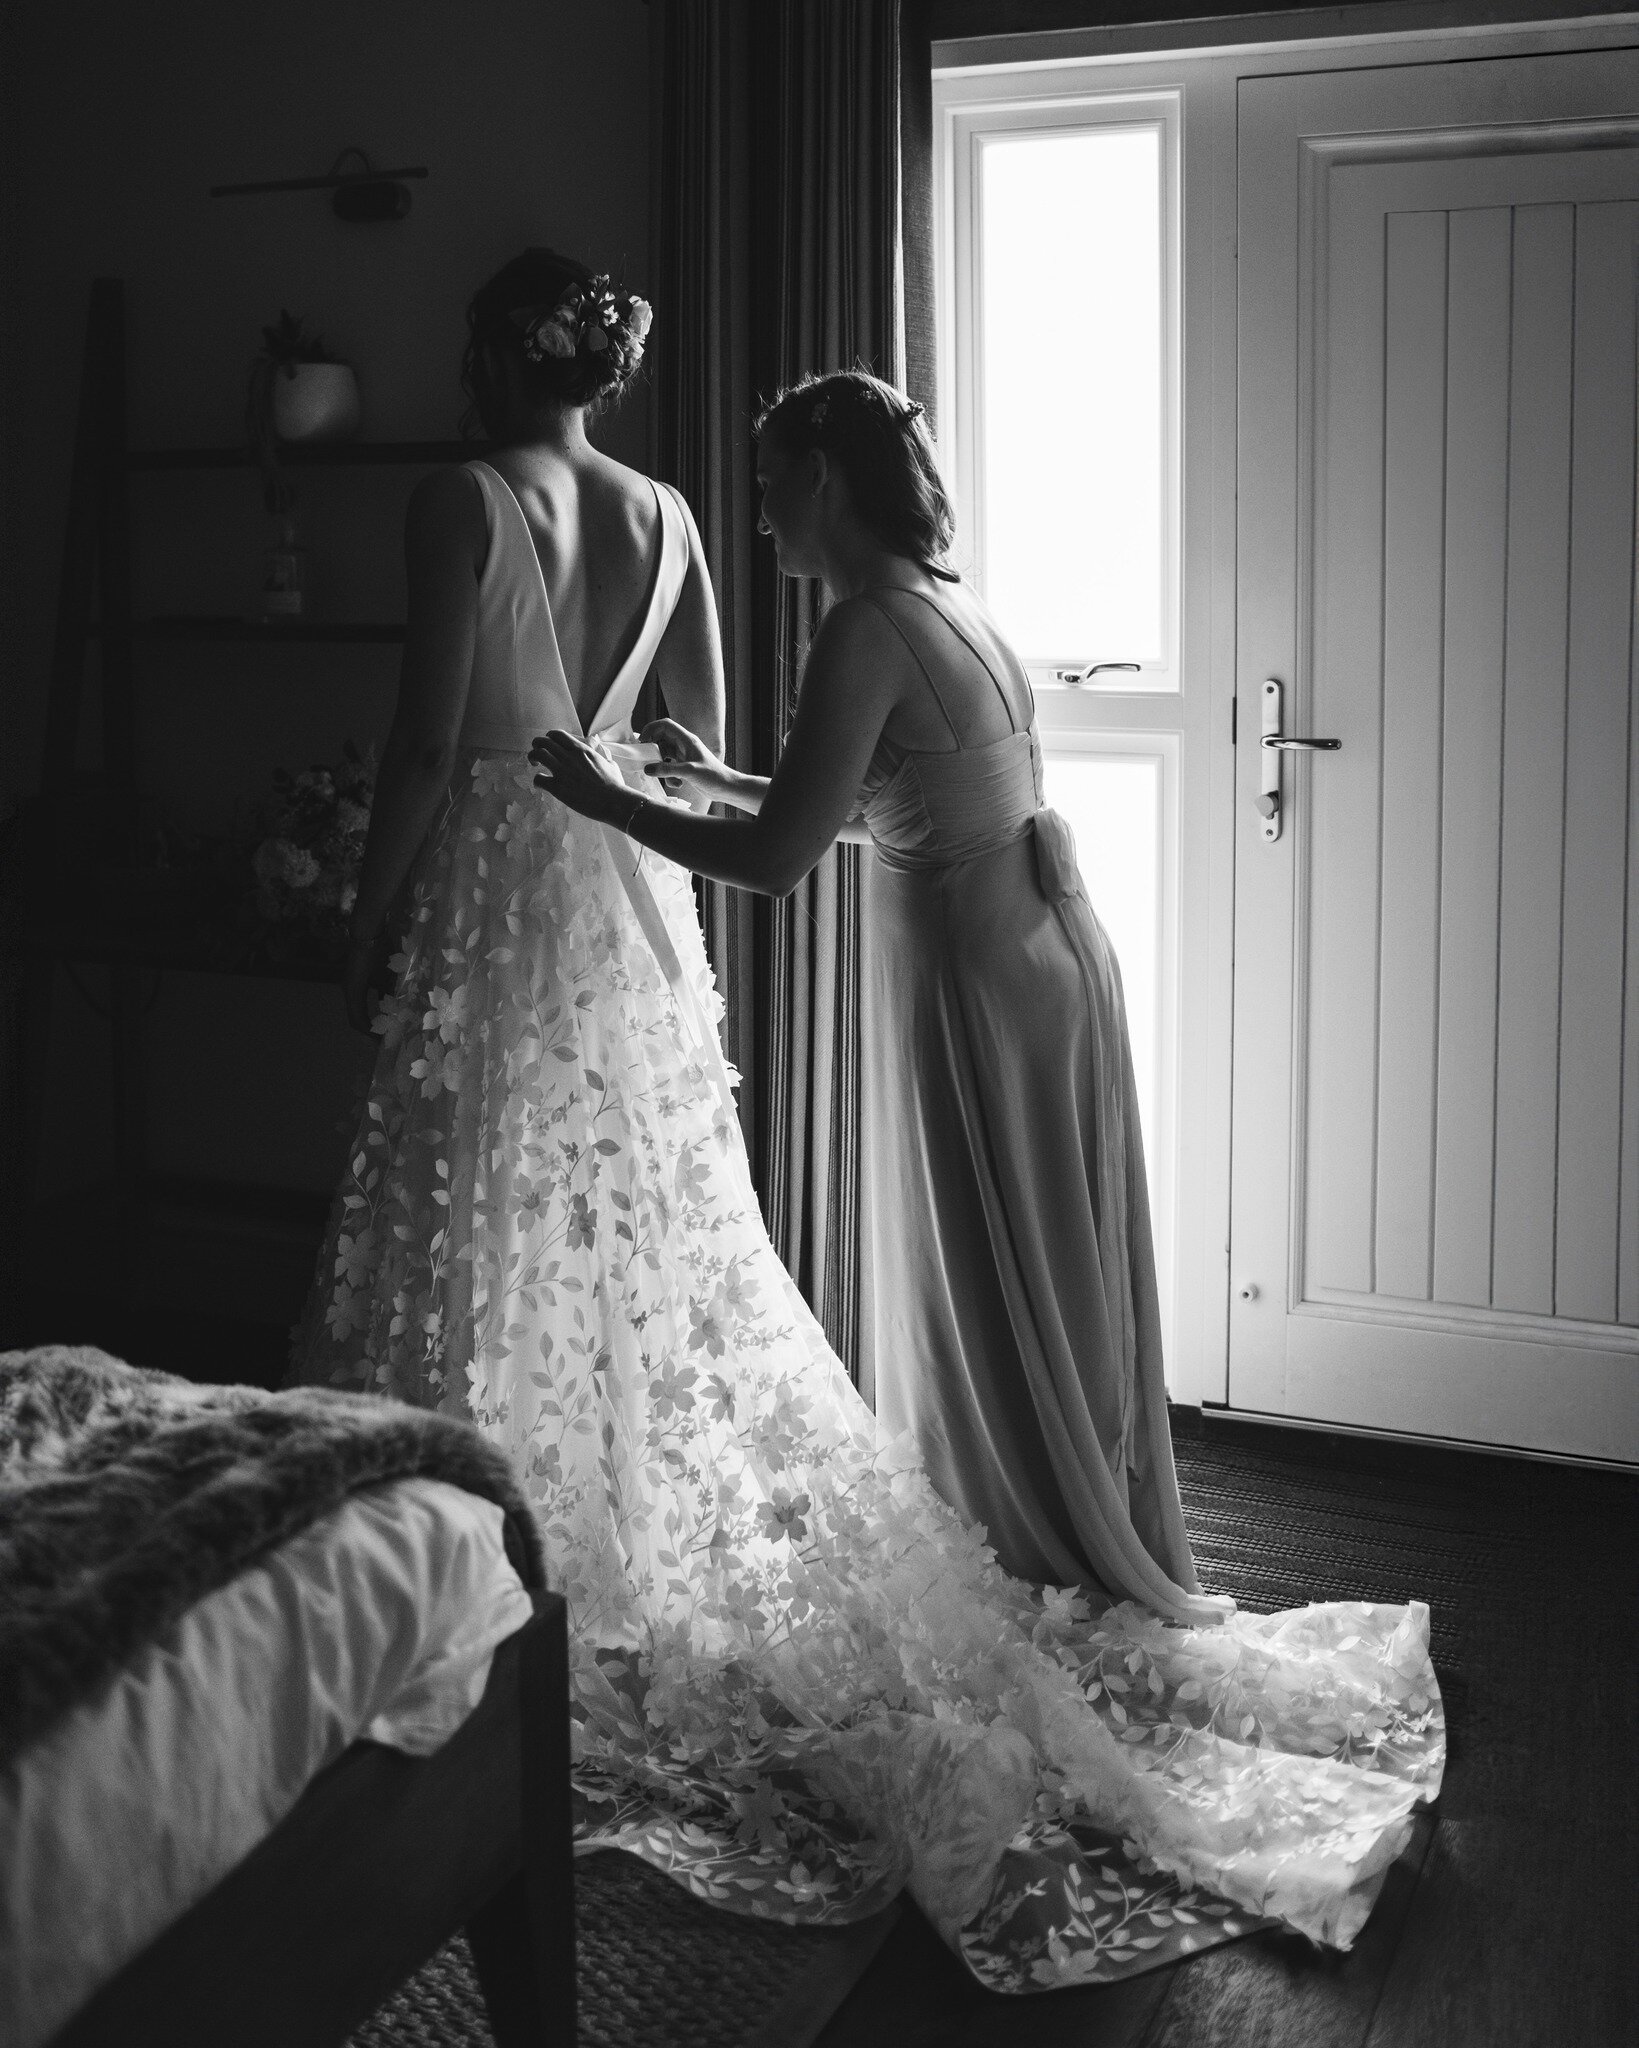 I knew this photo was always going to be black and white, before I even hit the shutter button! I love how the window light perfectly picked up the flowers cascading down Alicia's dress.

Reception venue: @englishheritage Wrest Park
Dress: @houseofsa